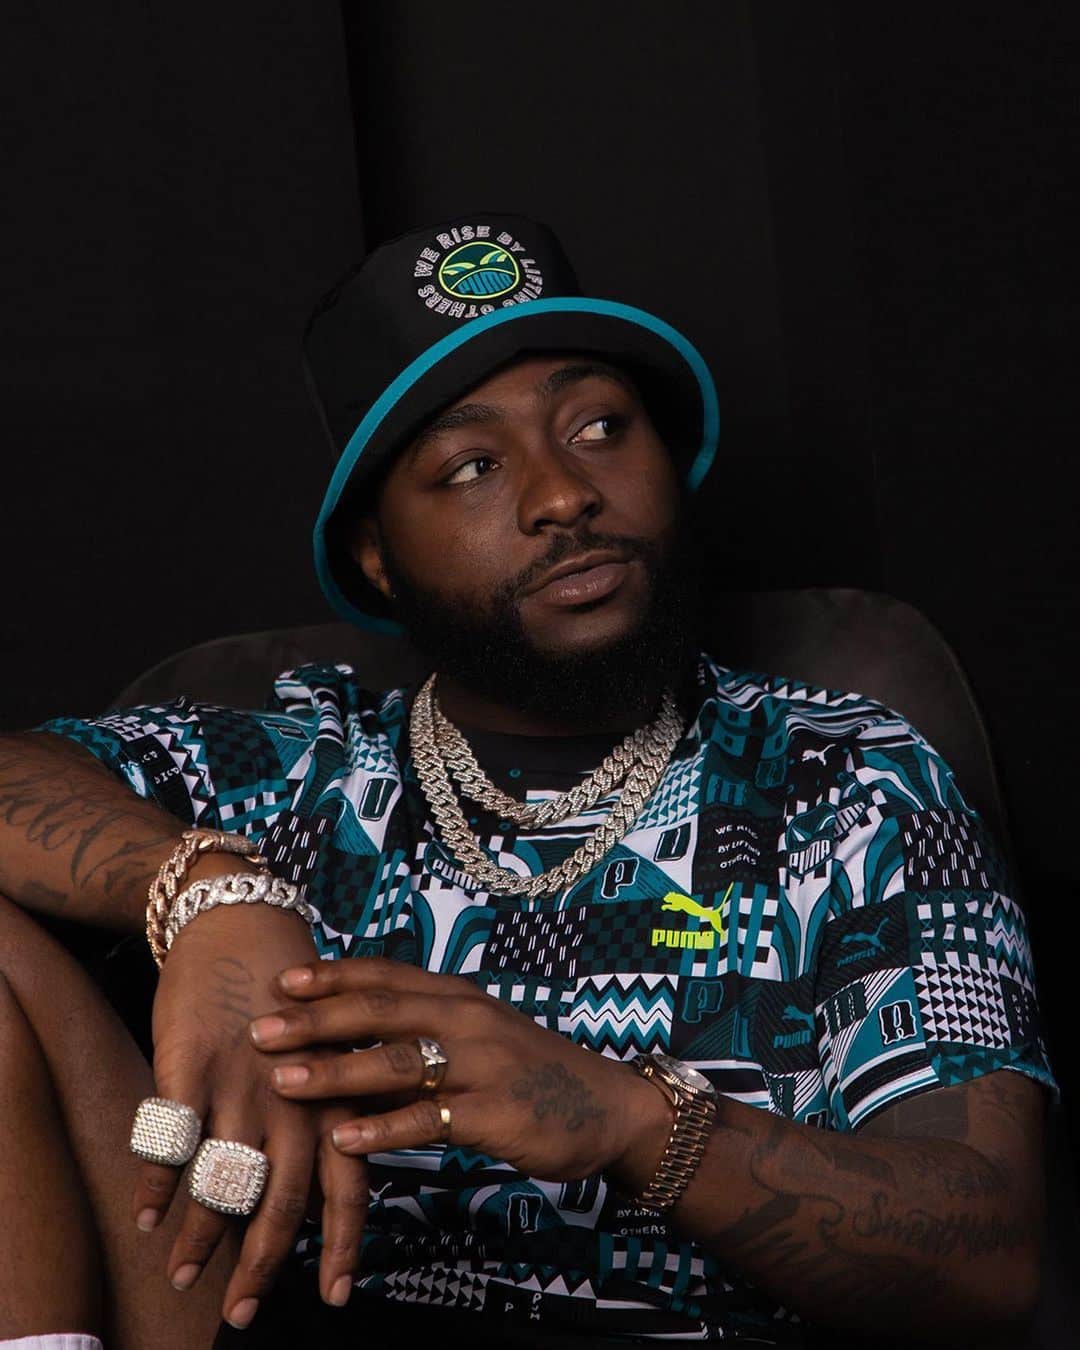 Puma sends its private jet to fly Davido to England for Manchester City's Sunday match